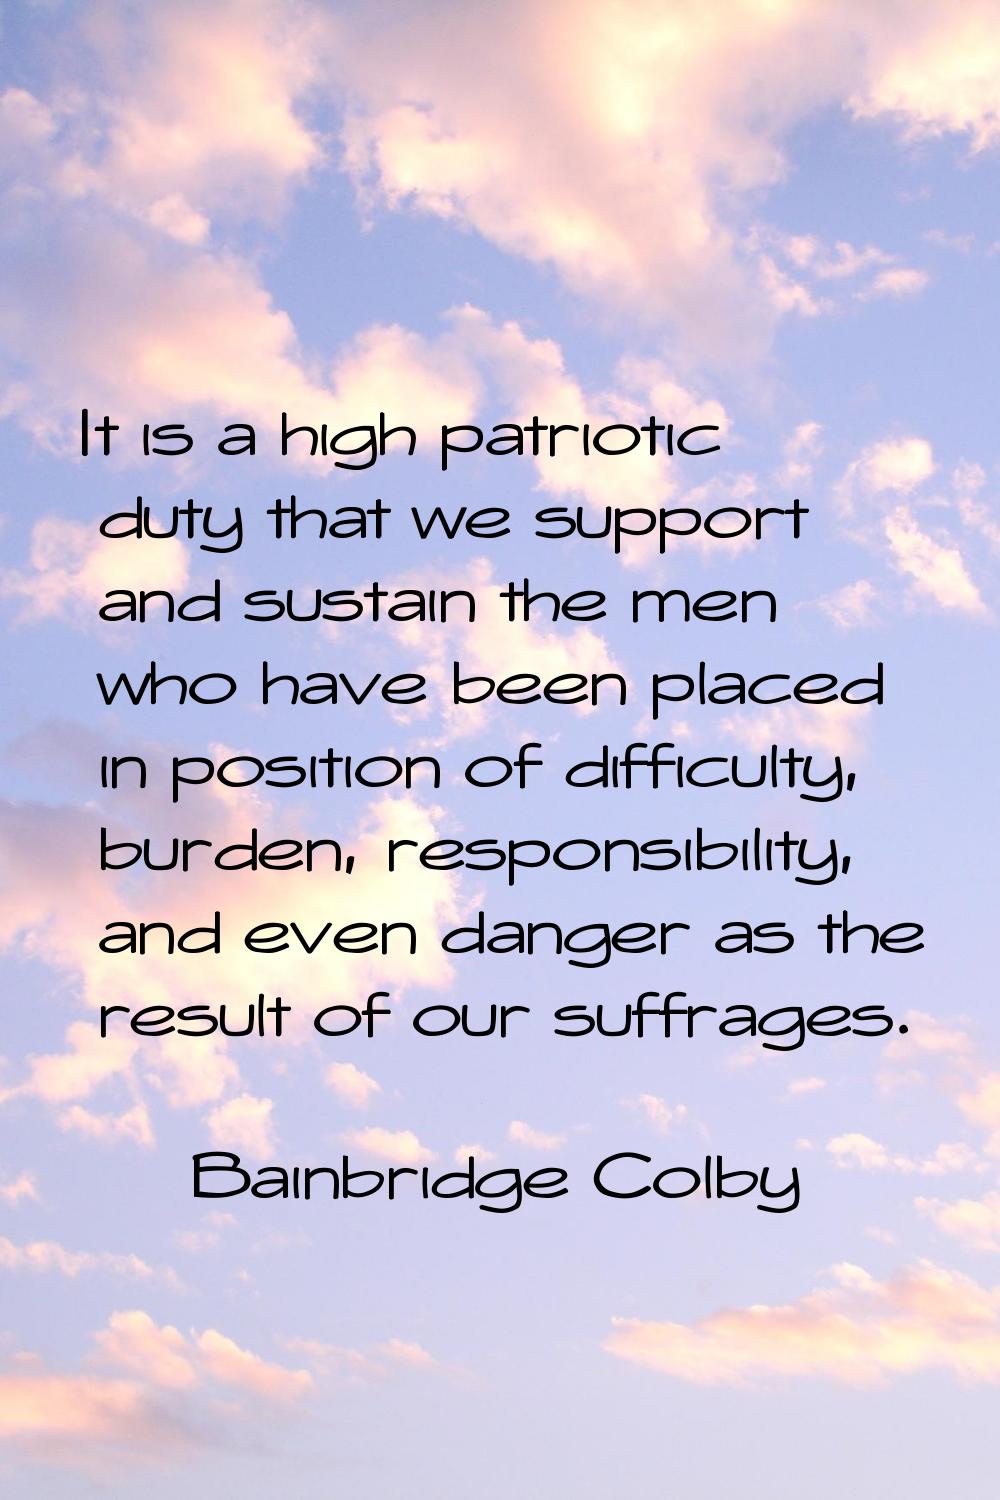 It is a high patriotic duty that we support and sustain the men who have been placed in position of